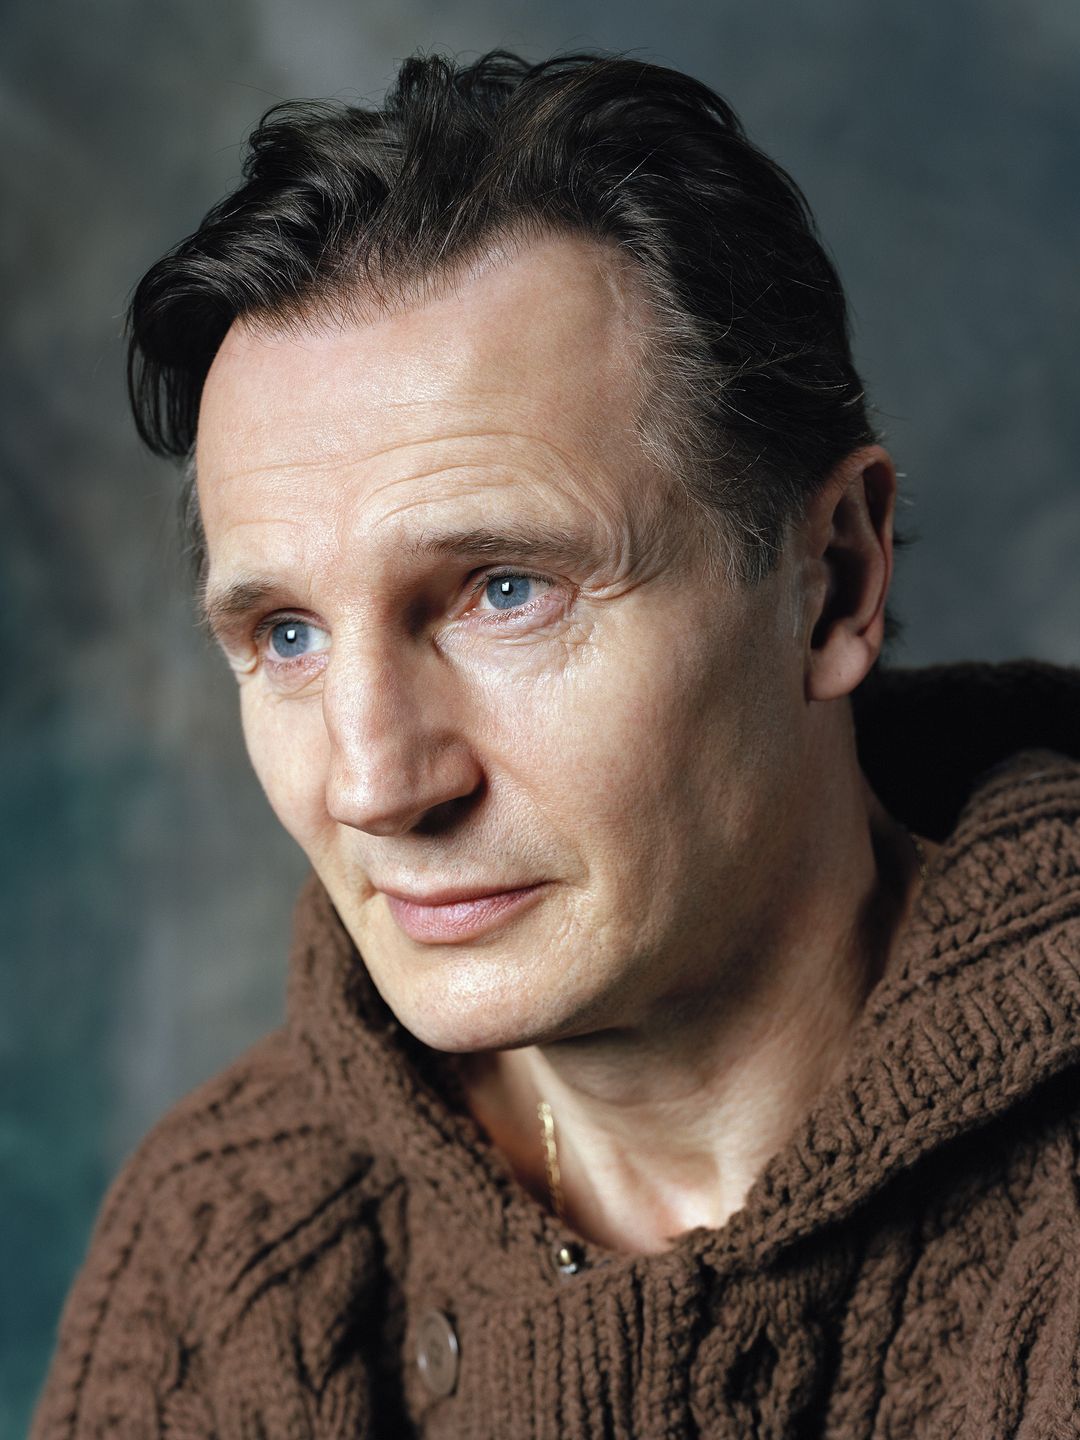 Liam Neeson current look